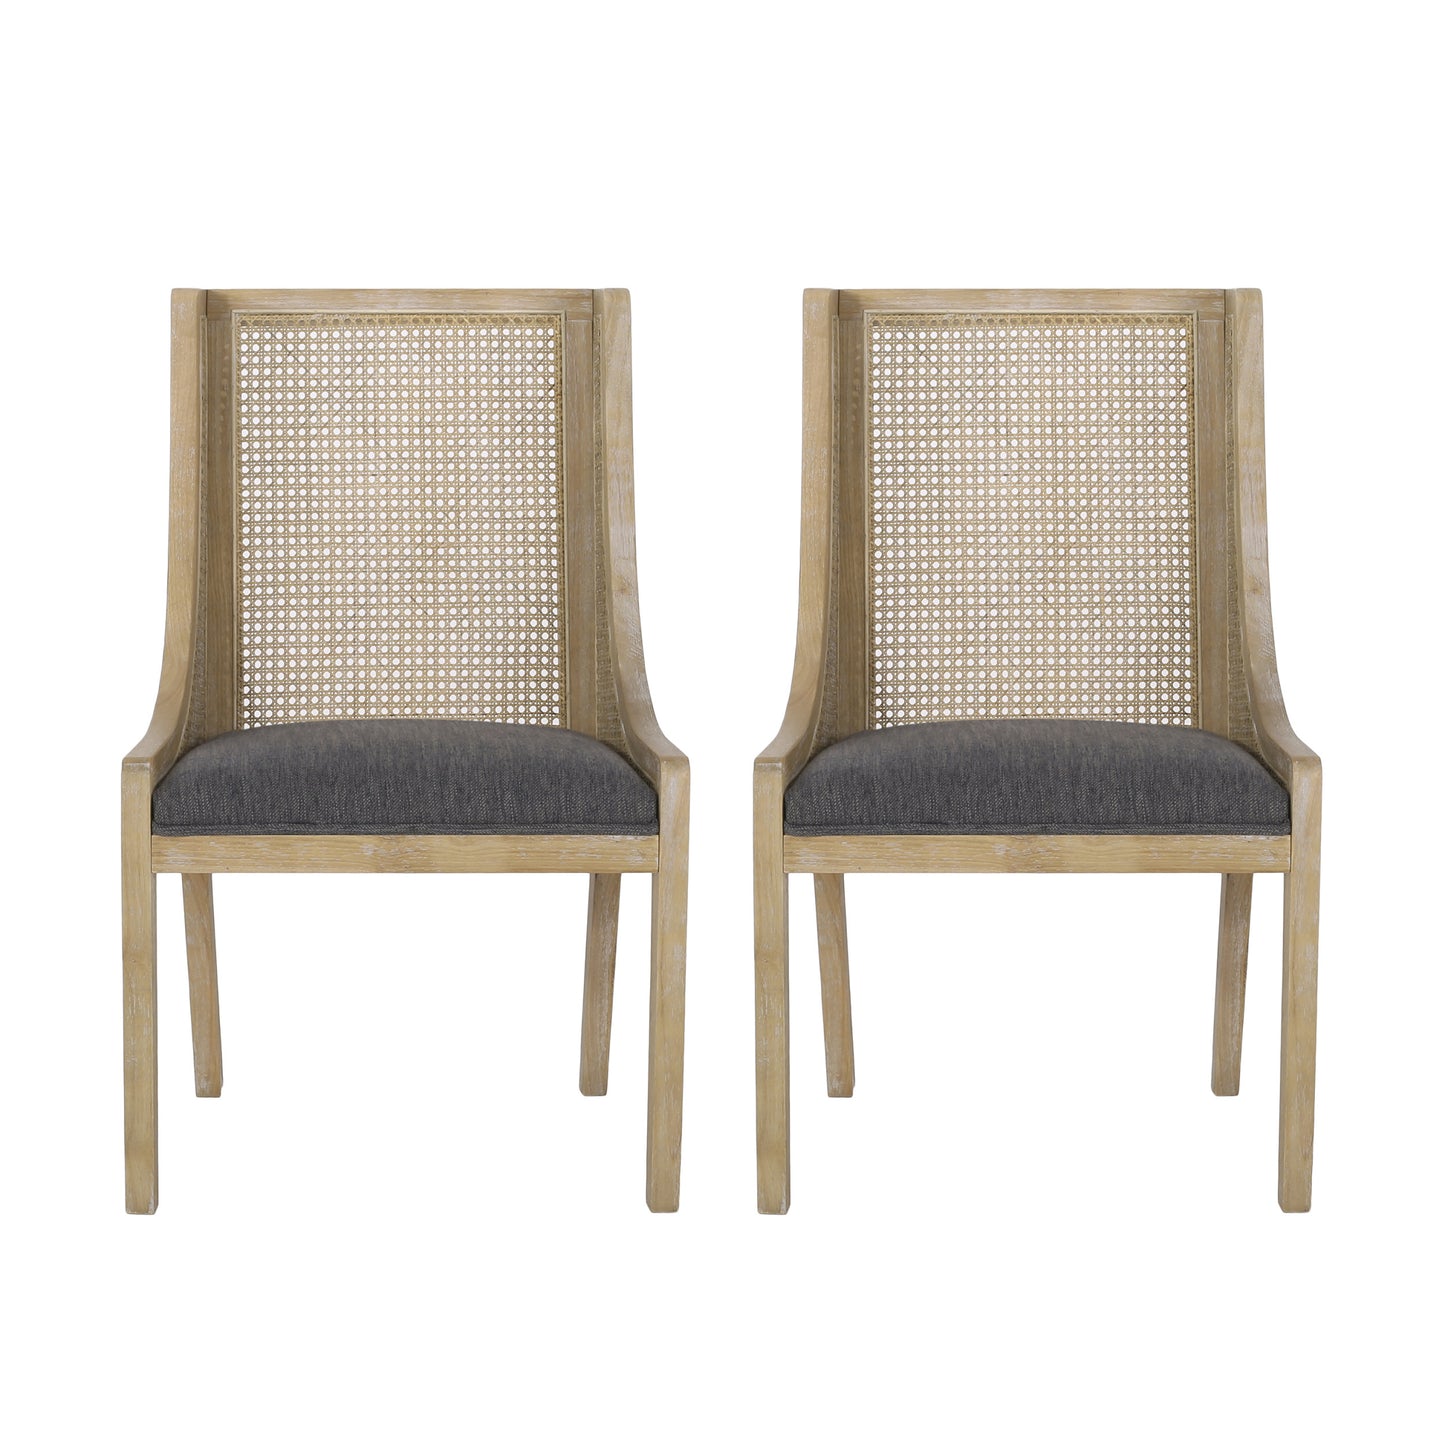 Wendell Rustic Cane and Wood Upholstered Dining Chairs, Set of 2